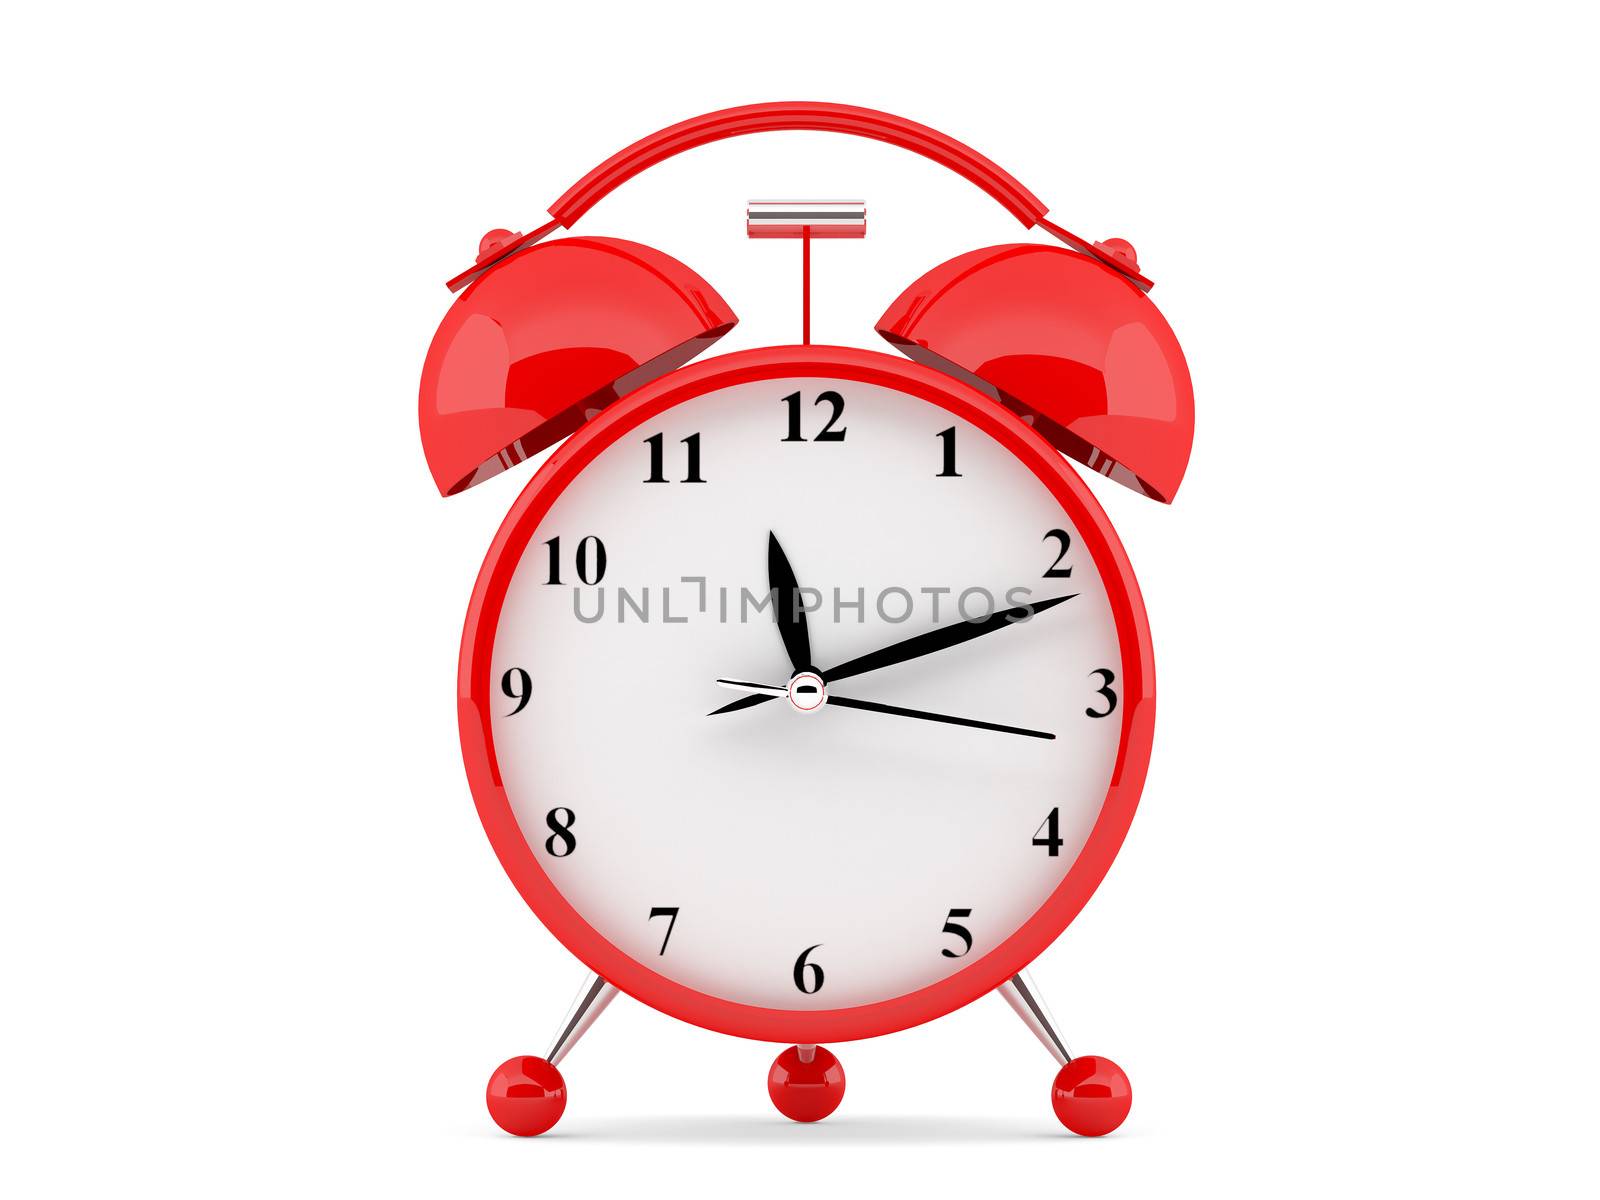 High resolution image. 3d rendered illustration. Alarm clock isolated on white background.